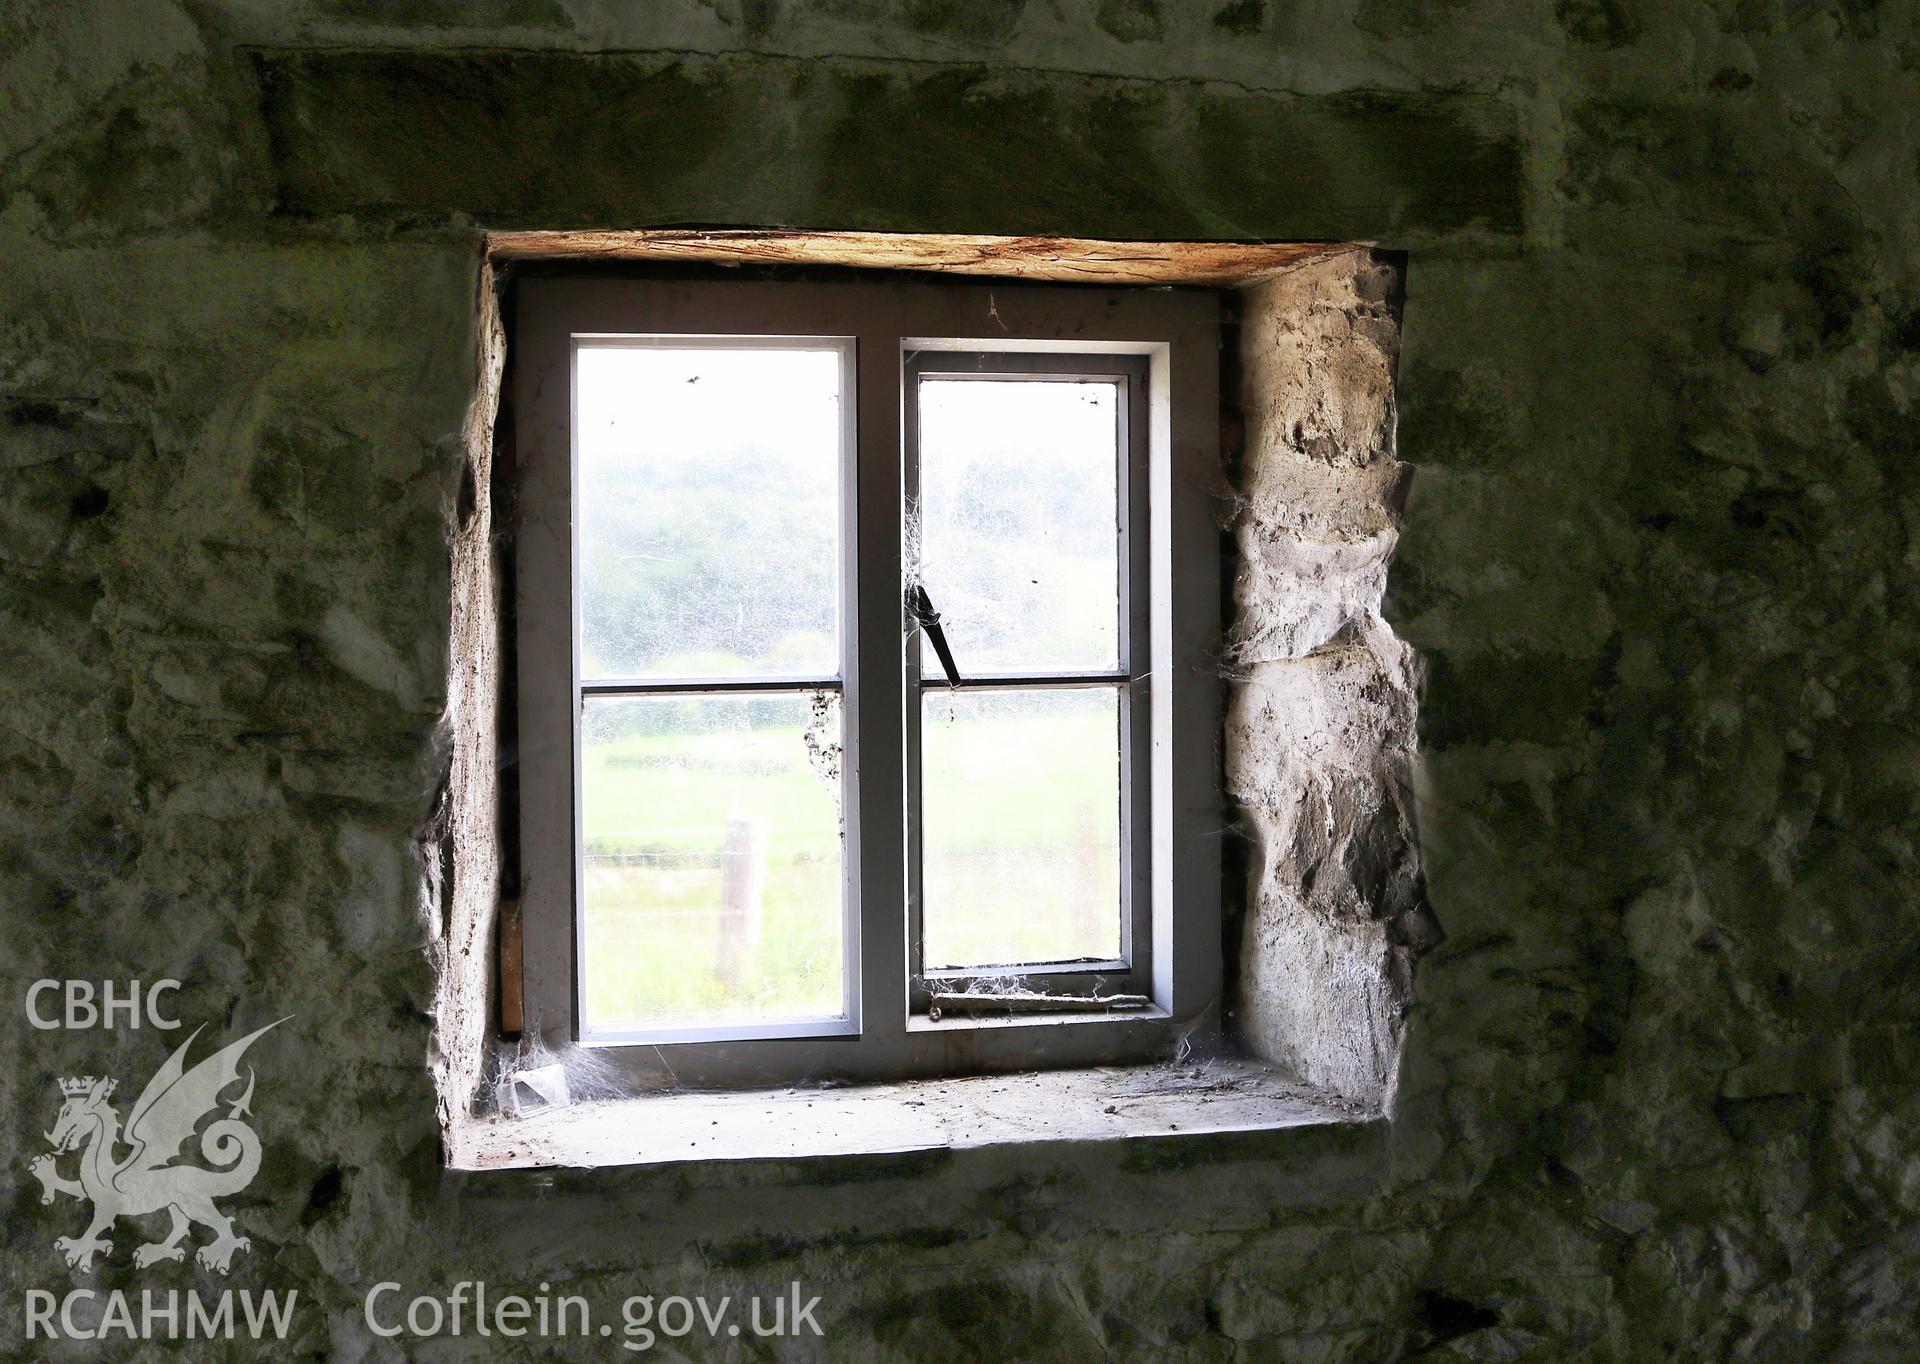 Photograph showing interior view of barn and cottage ground floor window at Maes yr Hendre, taken by Dr Marian Gwyn, 6th July 2016. (Original Reference no. 0086)